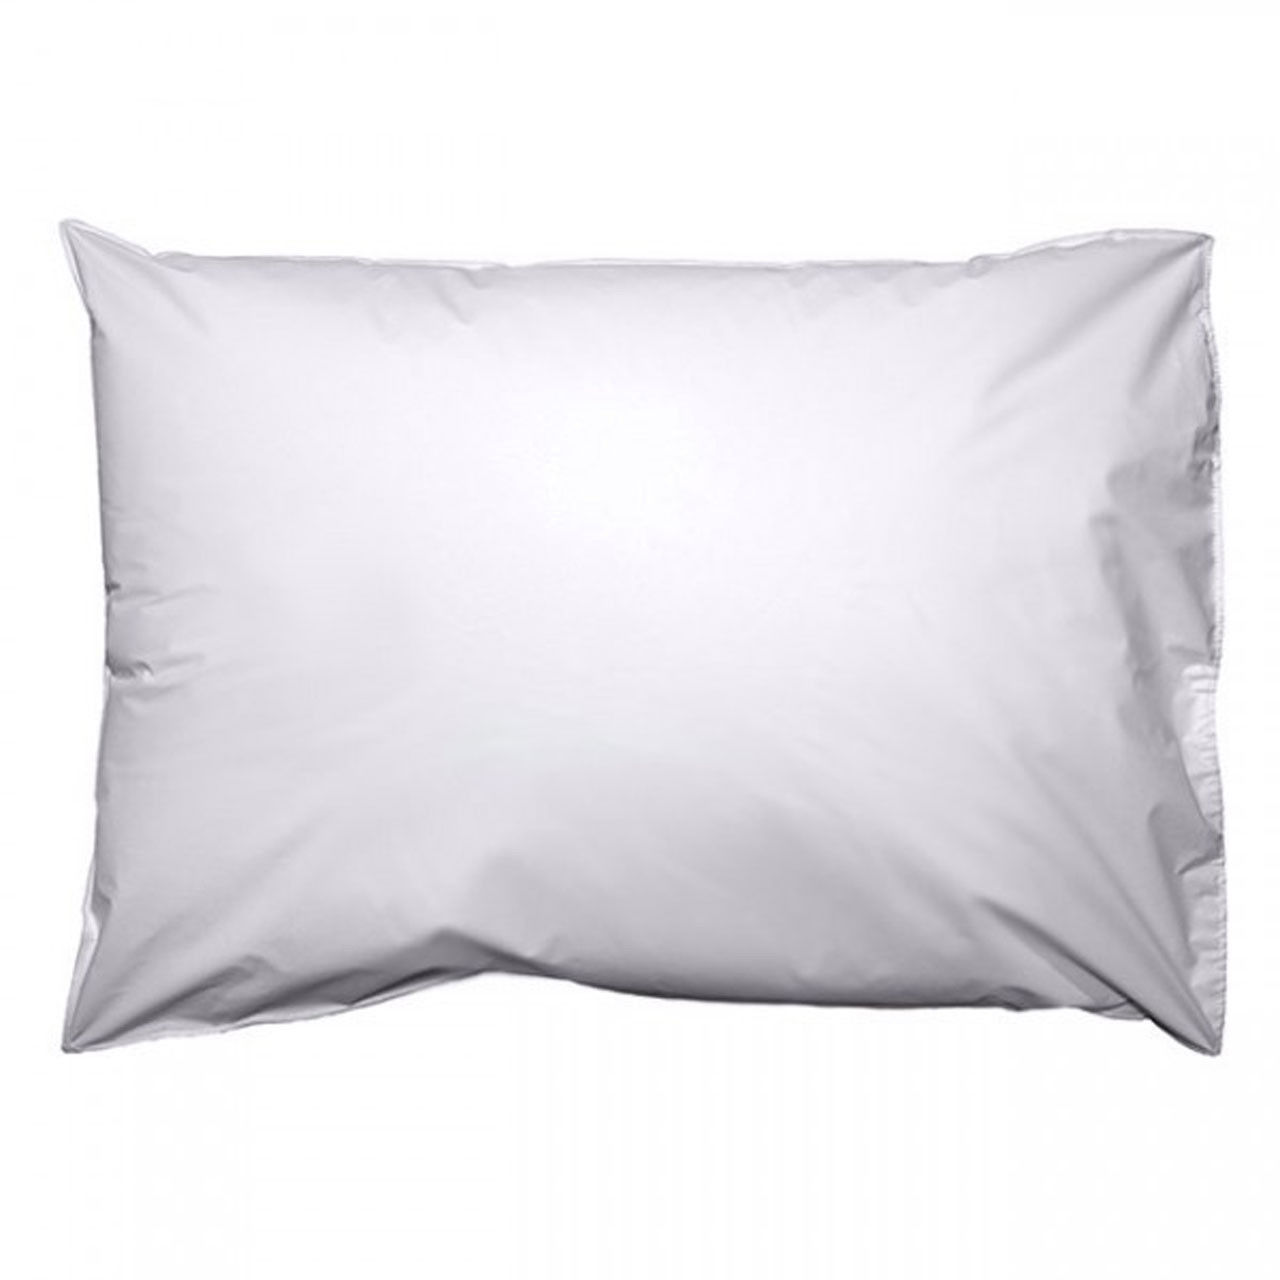 In which settings are wipeable pillows typically most suitable for use?